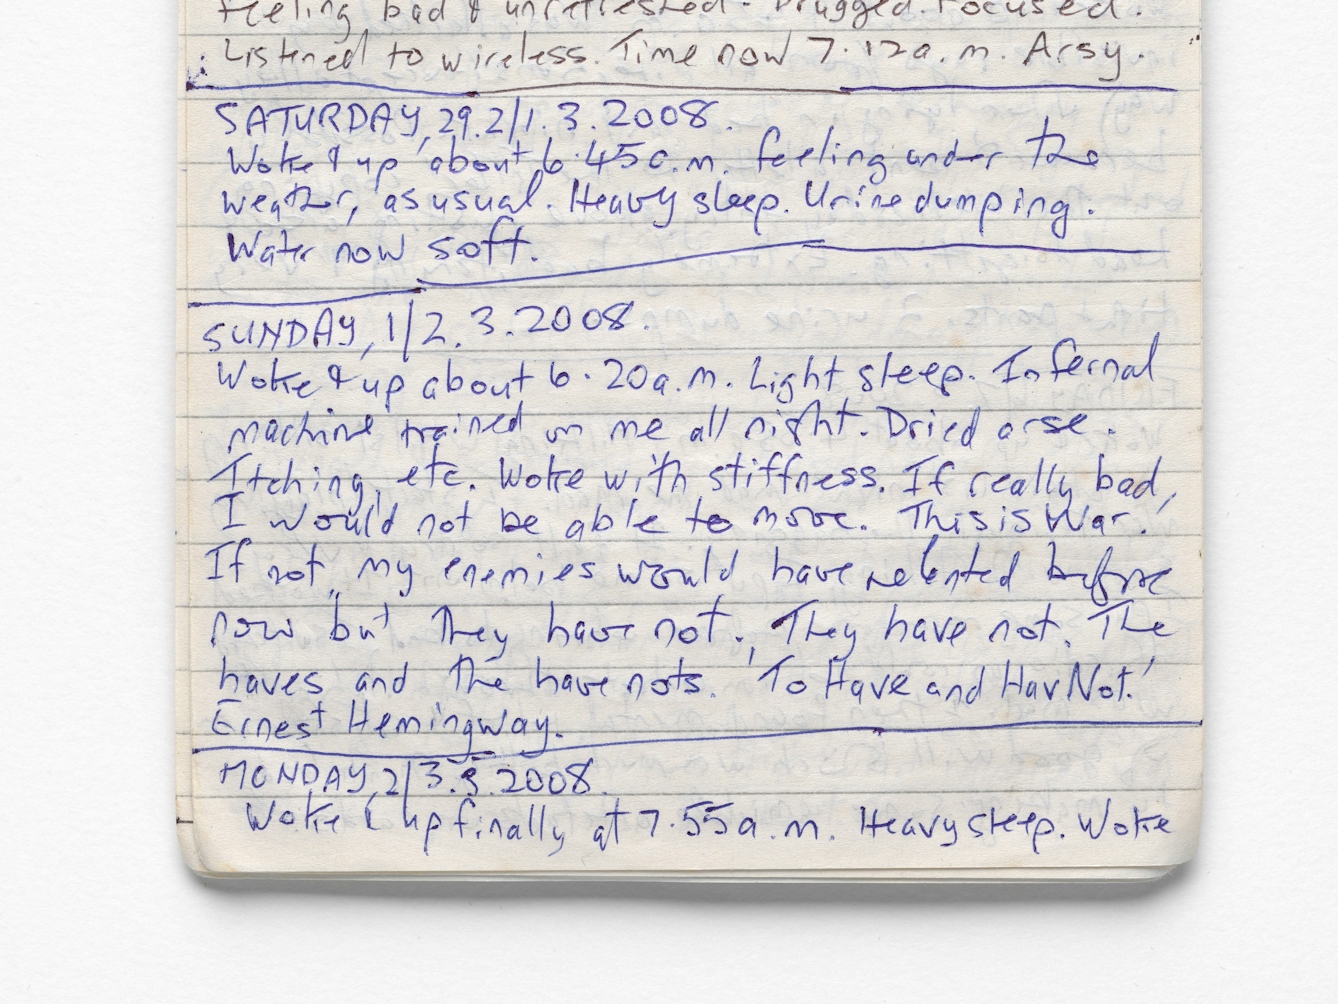 Photograph of the lower half of a lined notepad used as for diary entires. The handwritten text in blue and black ink, describe the short personal thoughts of the diary writer. One entry for example reads, 'Saturday 29.2/1.3.2008. Woke up about 6:45am feeling under the weather as usual. Heavy sleep. Urine dumping. Water now soft.'